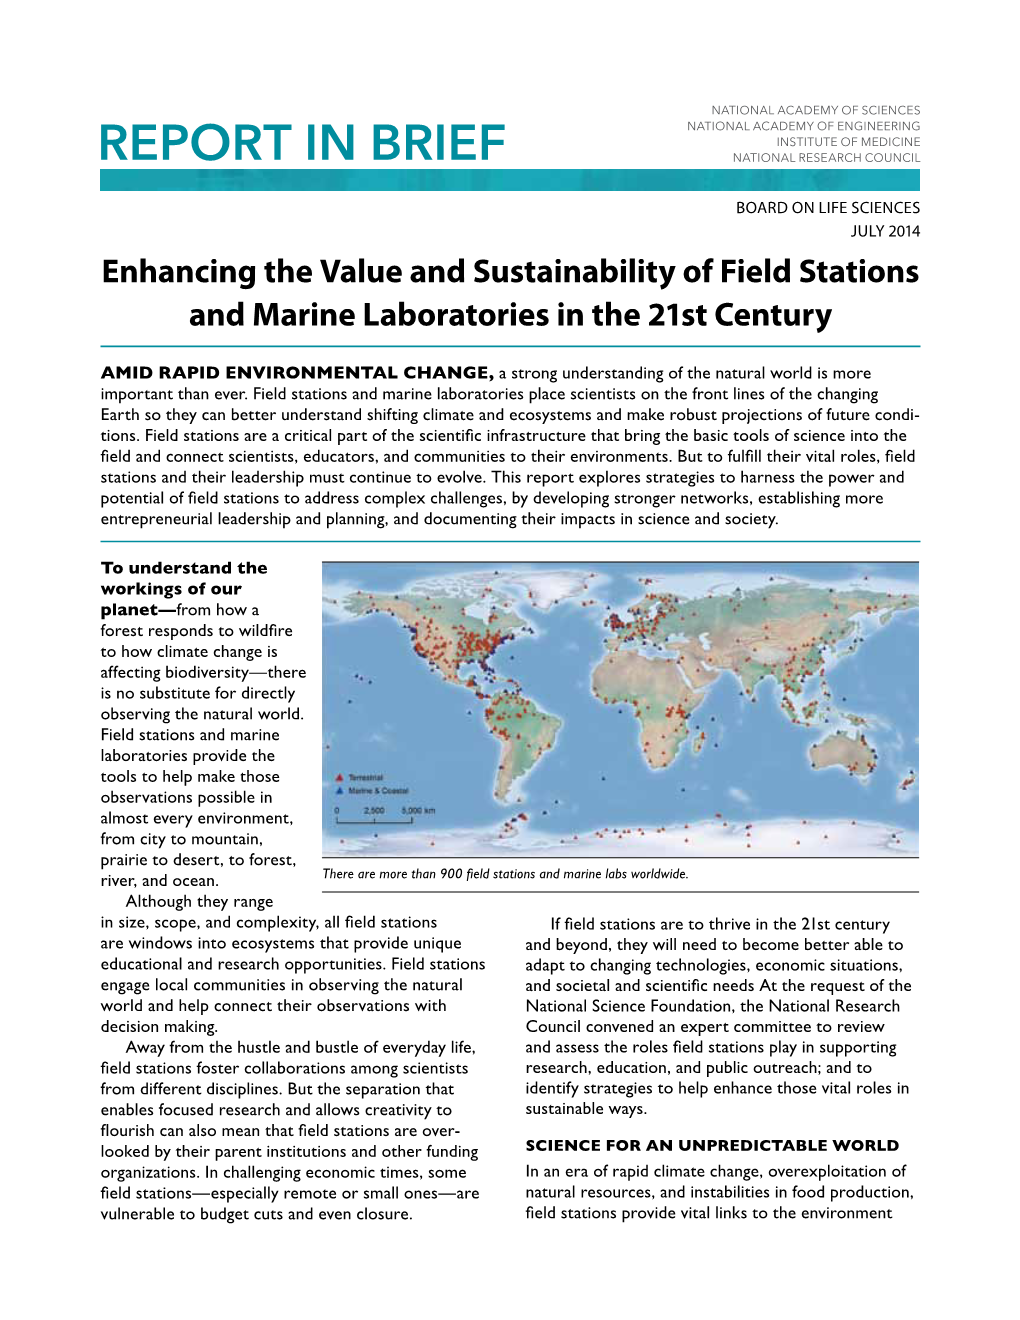 Enhancing the Value and Sustainability of Field Stations and Marine Laboratories in the 21St Century